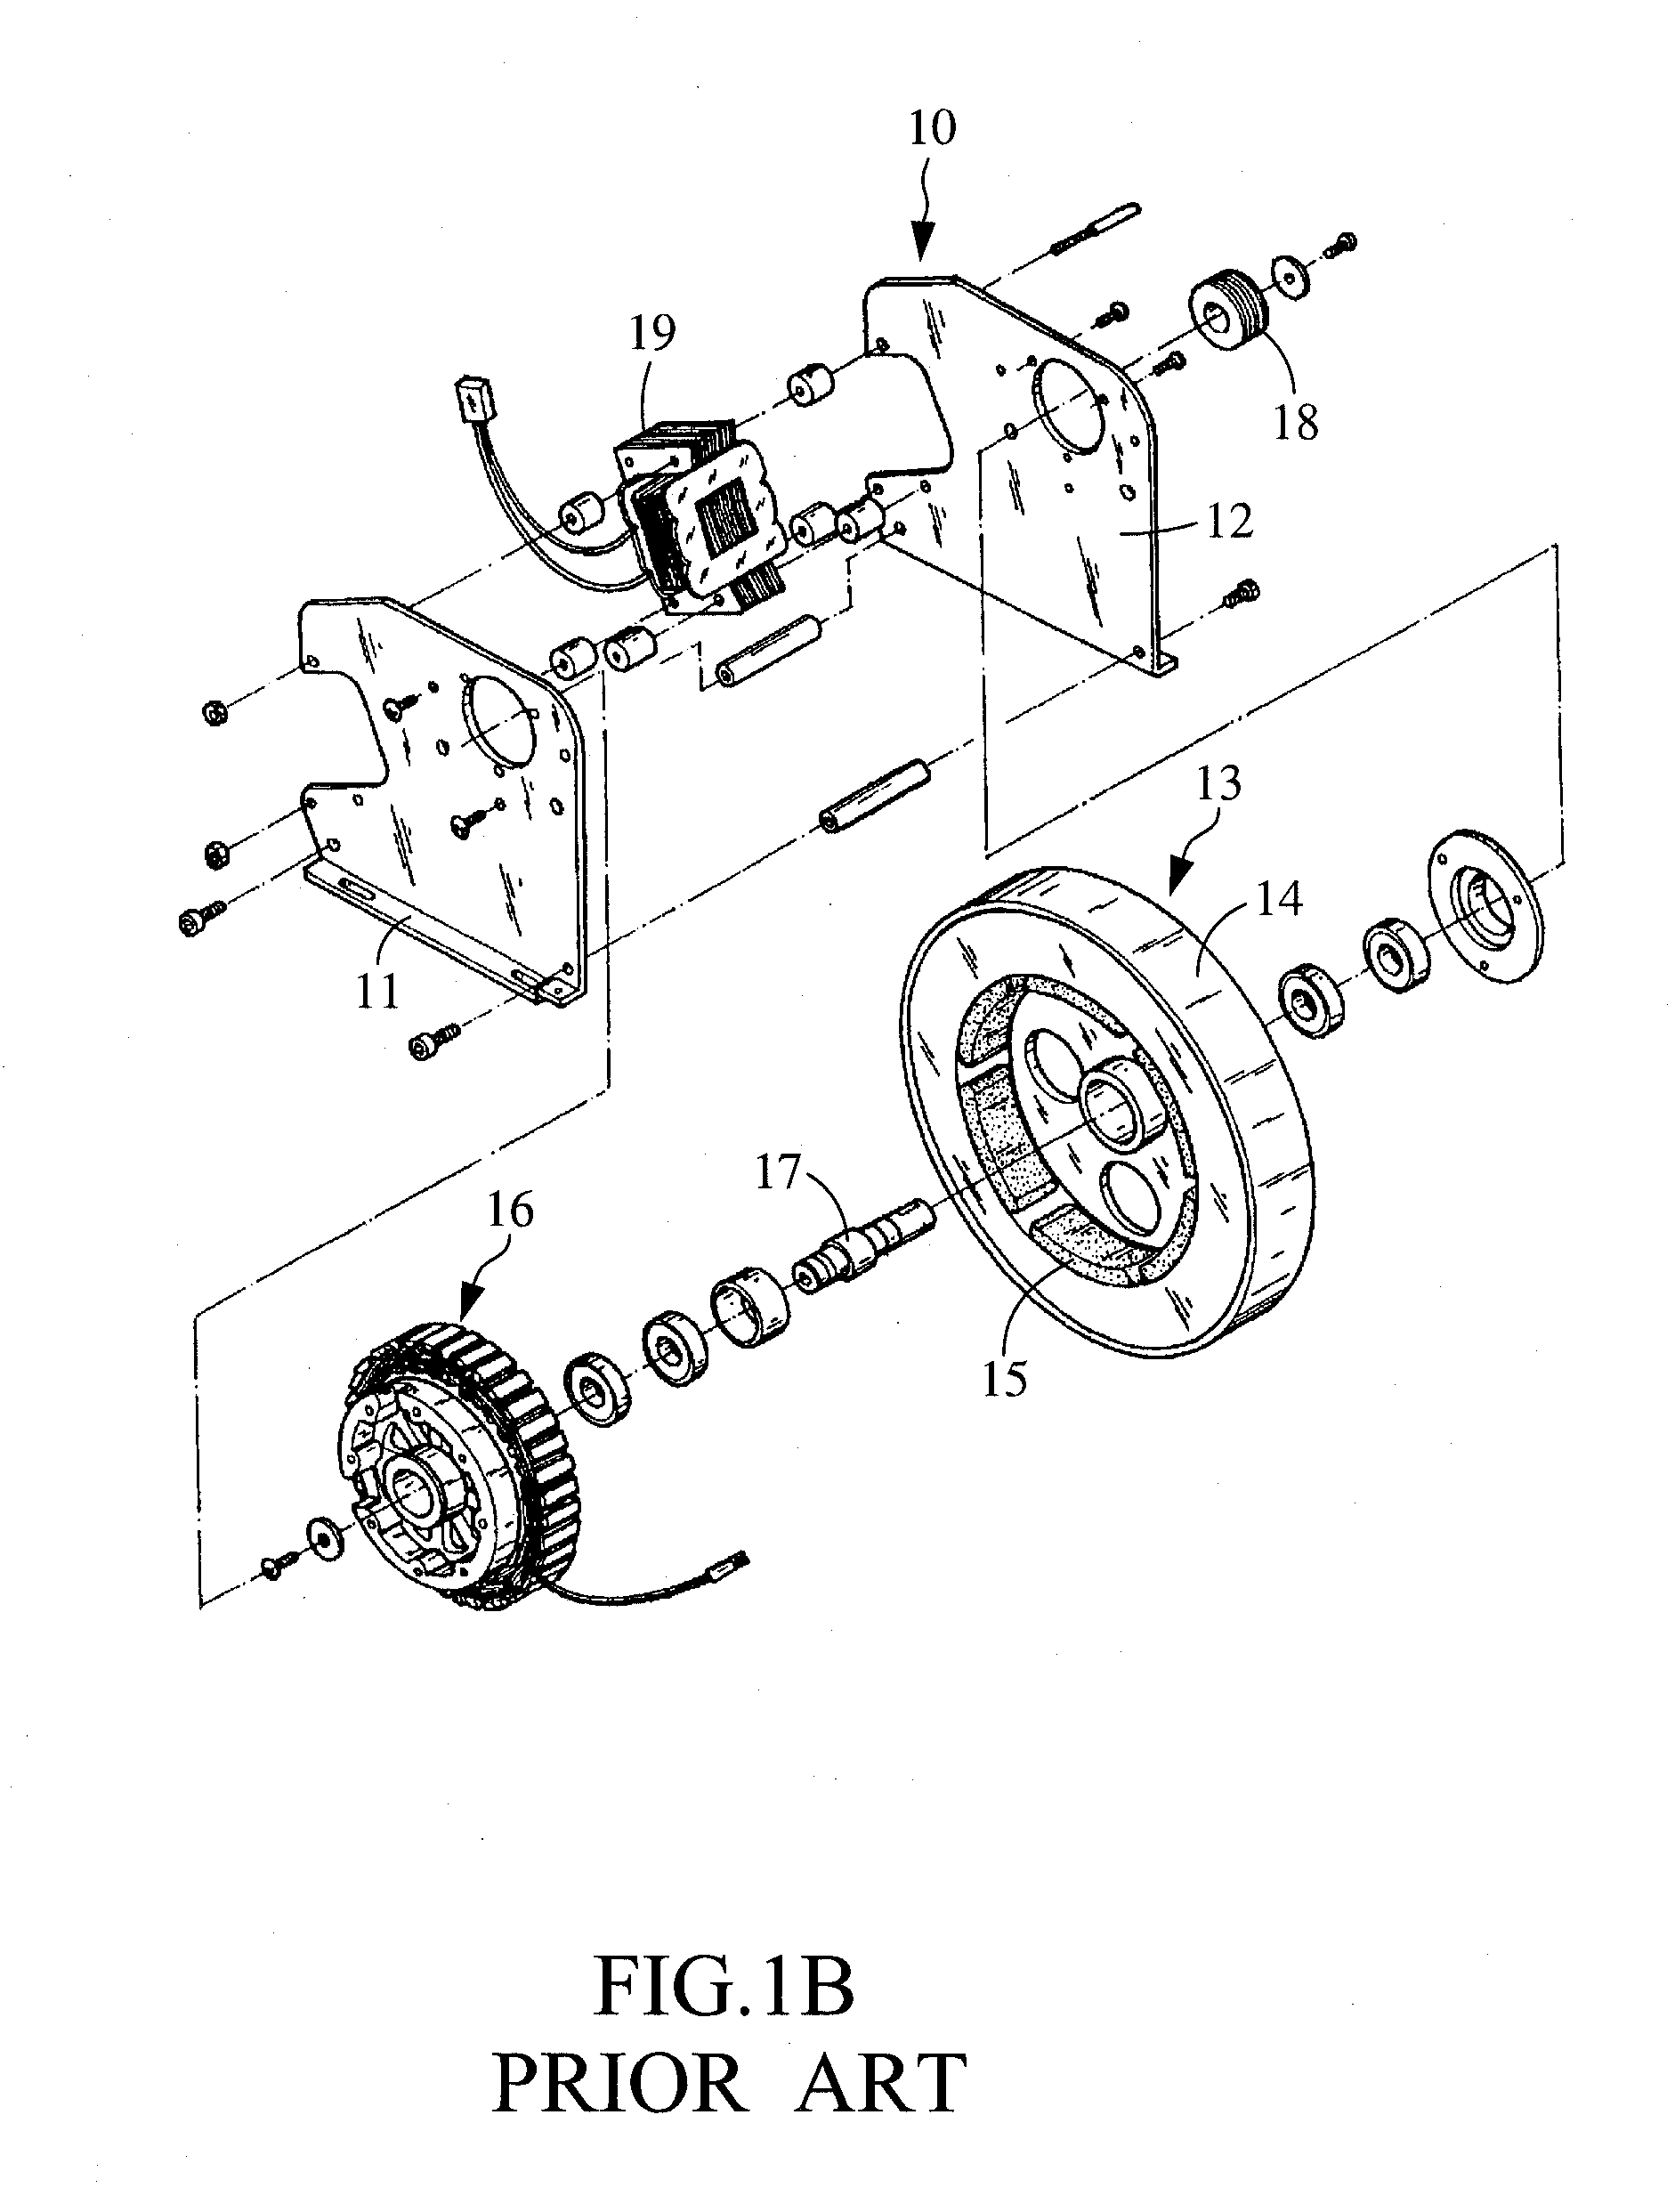 Eddy-current magnetic controlled loading device used in a magnetic controlled power generator